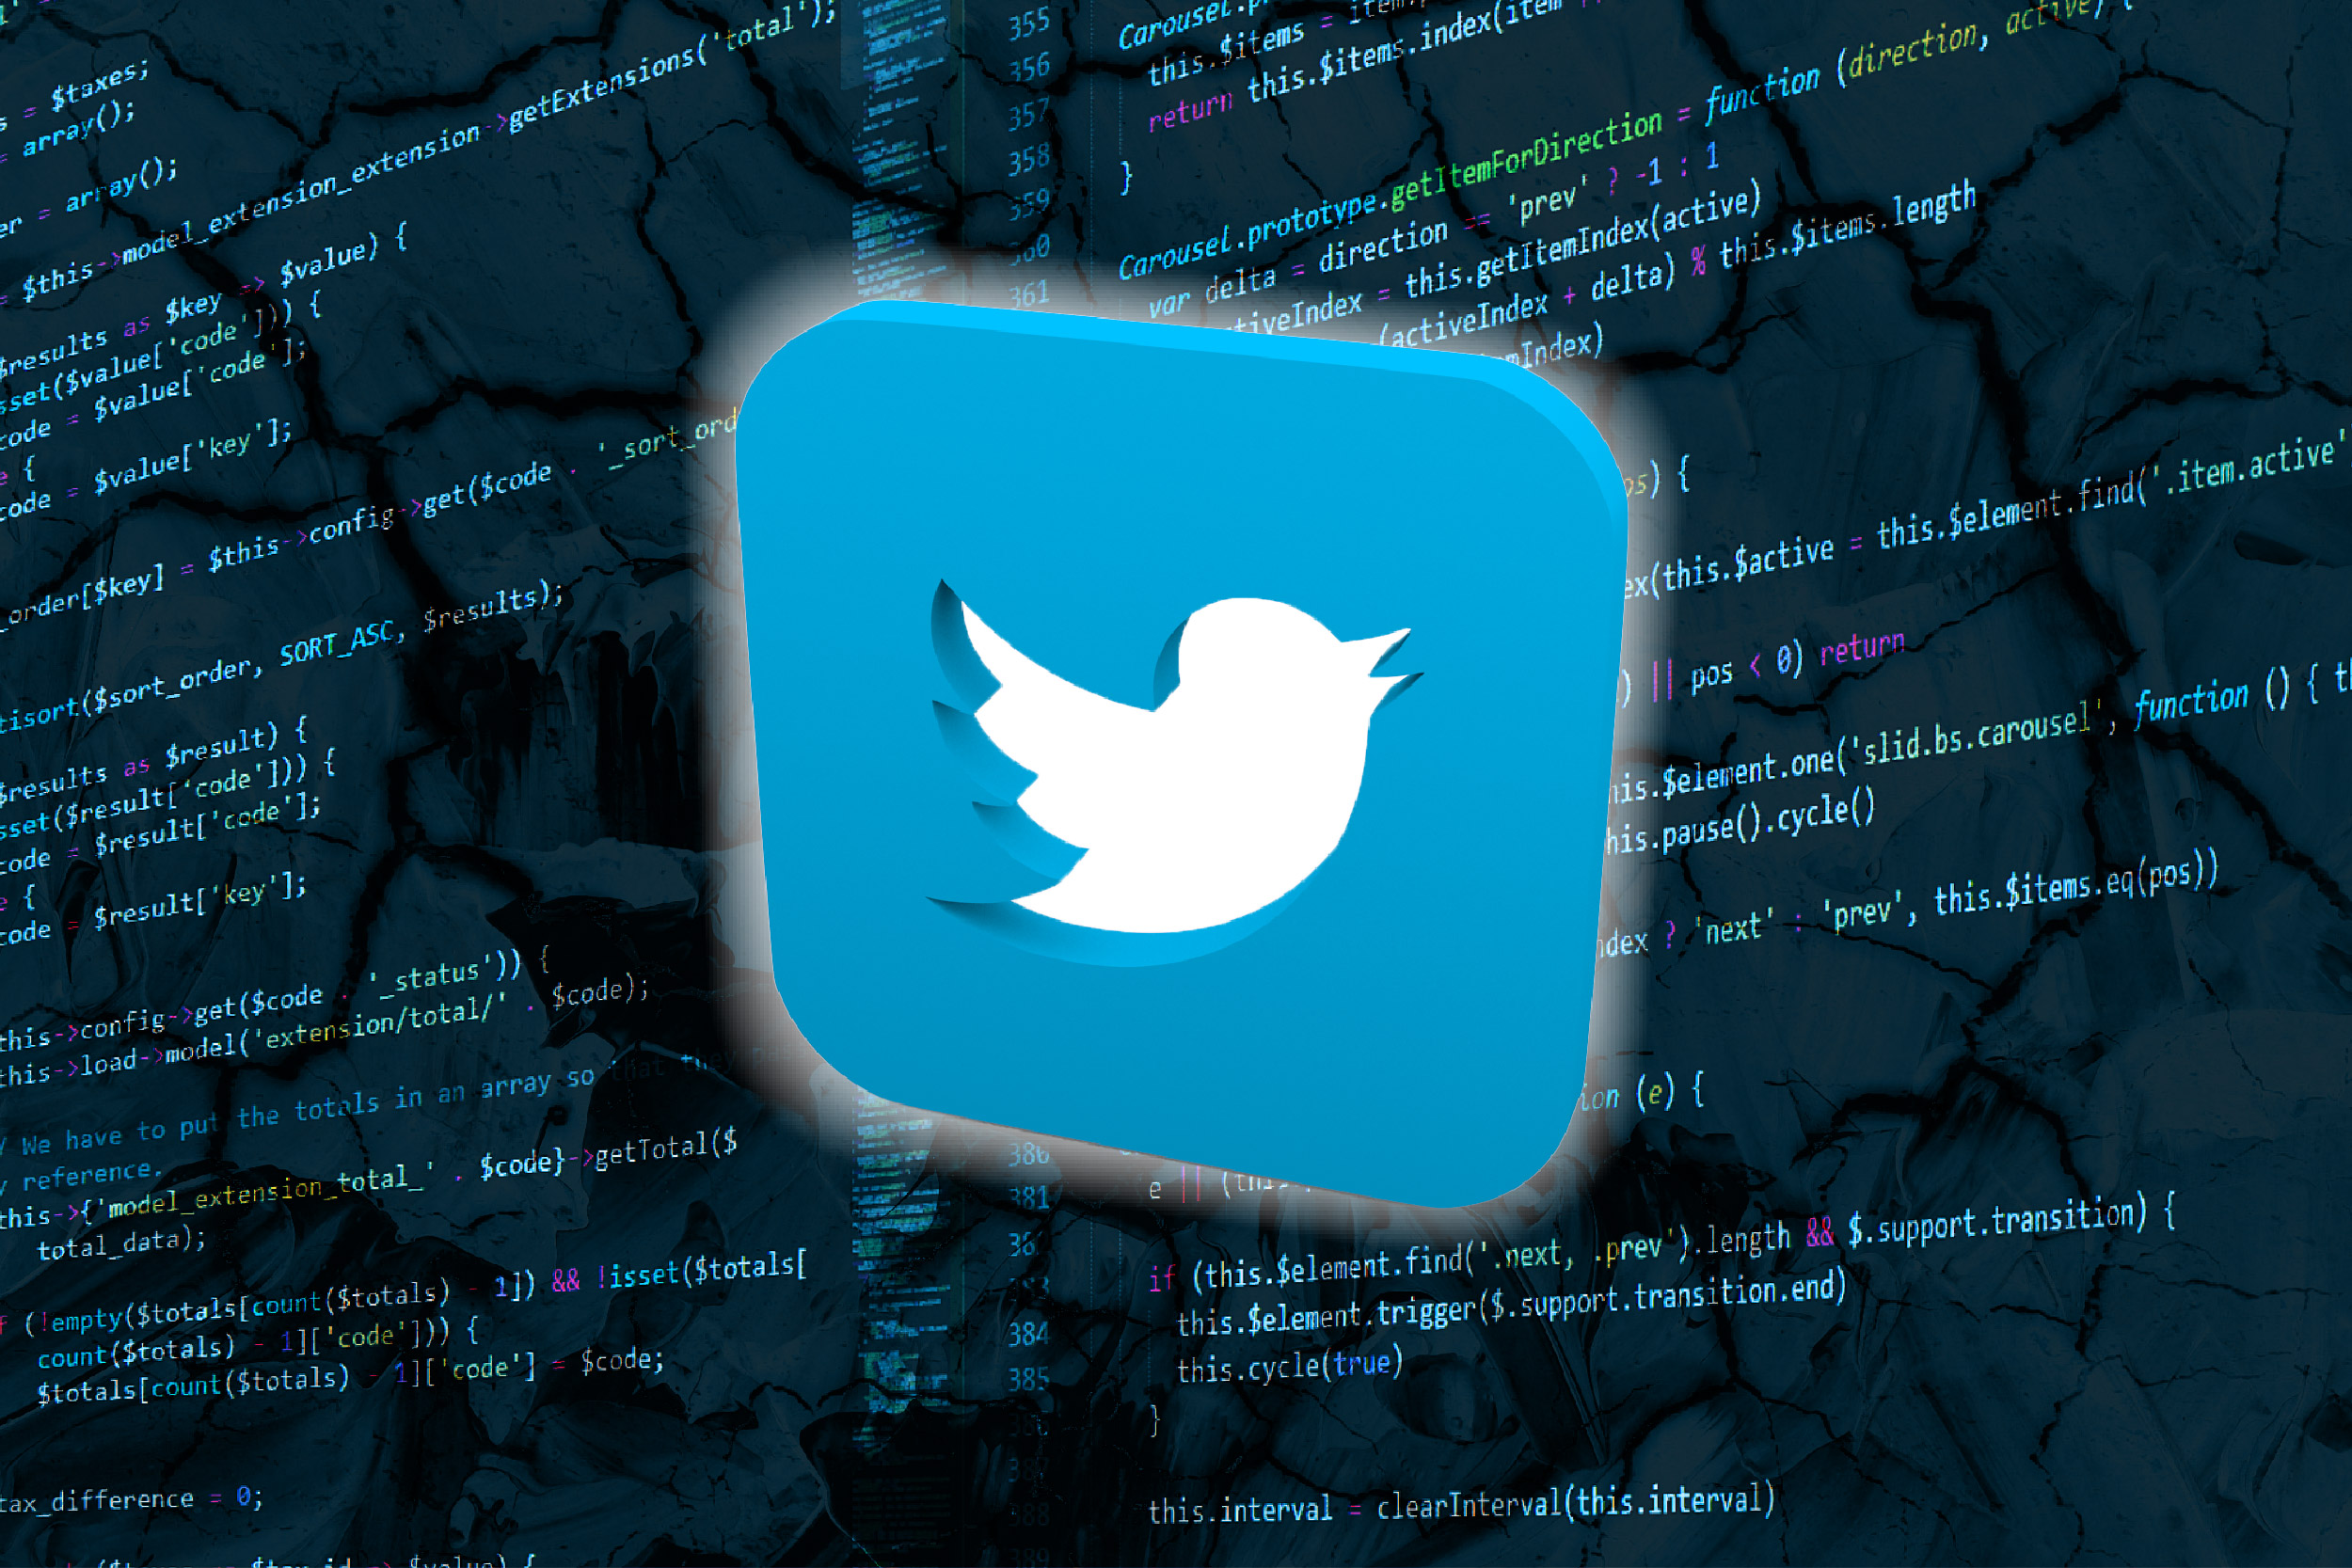 Twitter Removes Source Code that Leaked on GitHub and Searching for  Downloaders